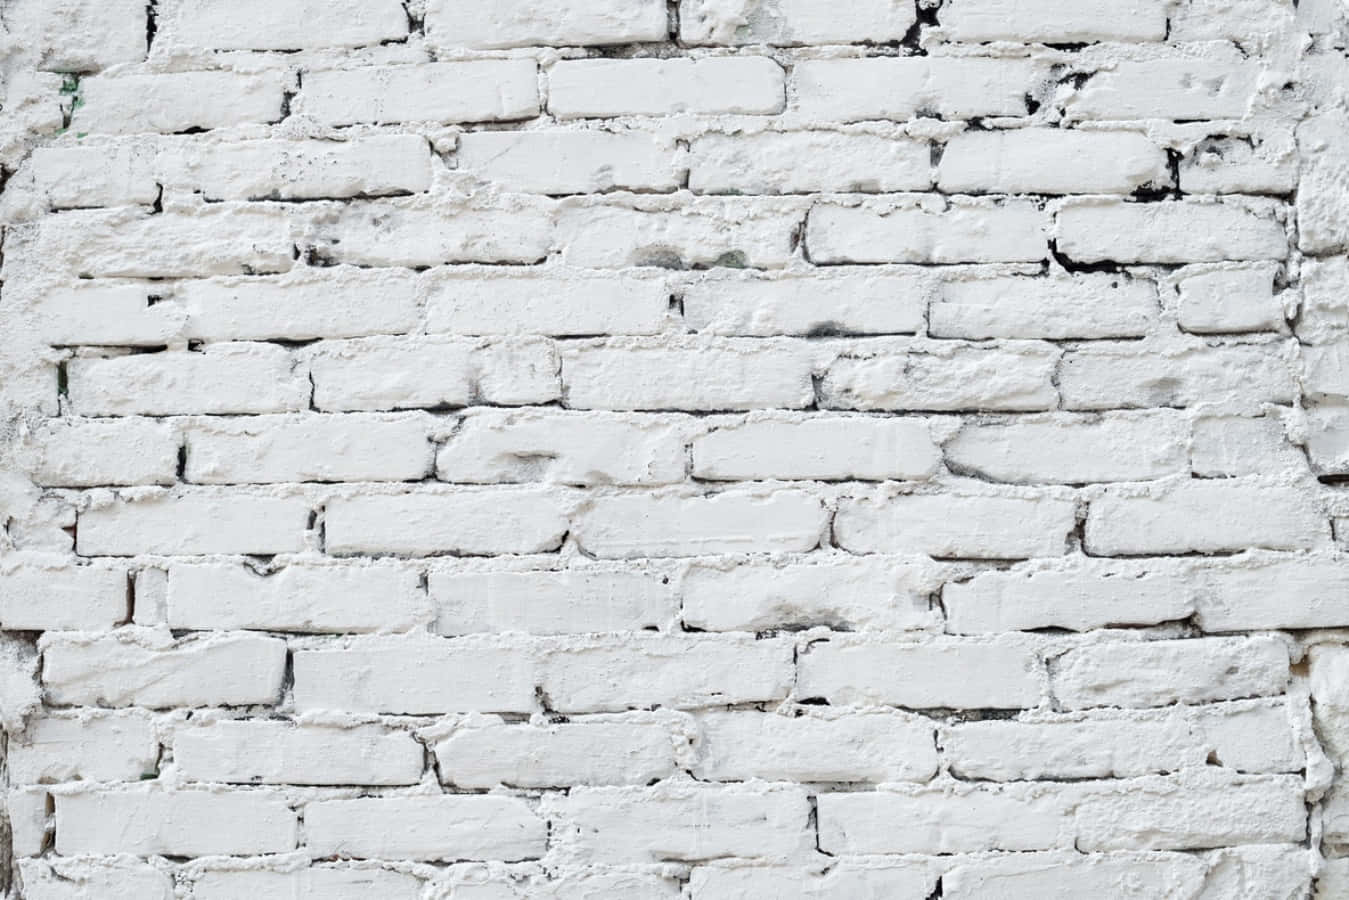 Simple, clean and modern – a white brick wall provides the perfect backdrop